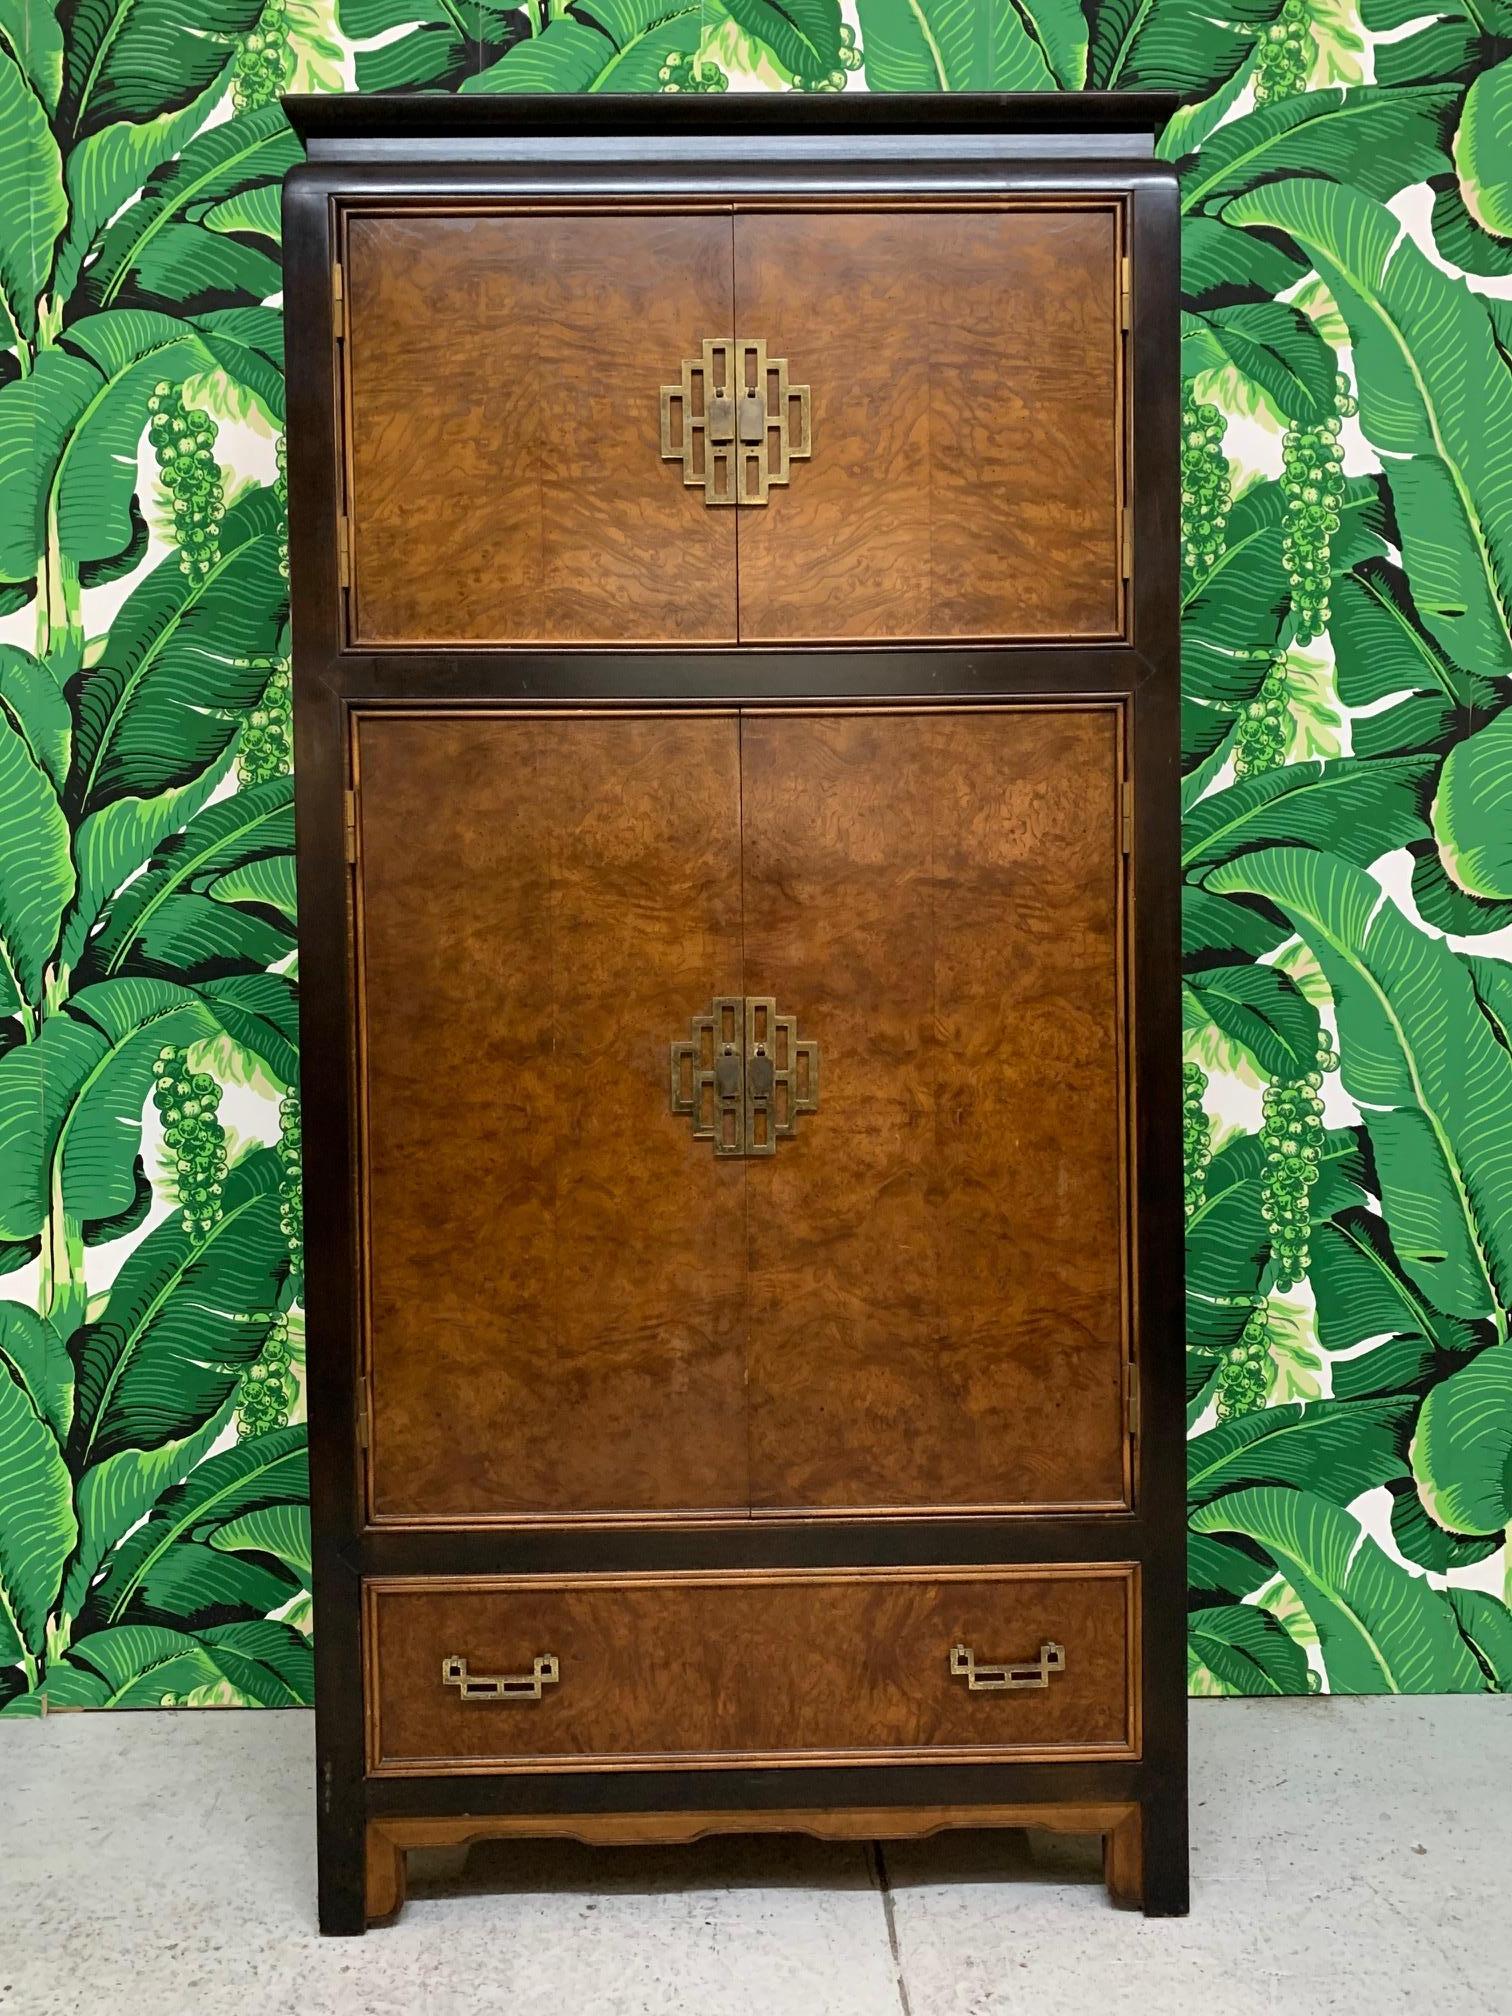 Large chinoiserie wardrobe/armoire by Century Furniture designed by Raymond Sabota as part of the Chin Hua collection. Beautiful Asian styling with burl wood and brass hardware. One drawer has been retro-fitted with keyboard slide out tray. Interior